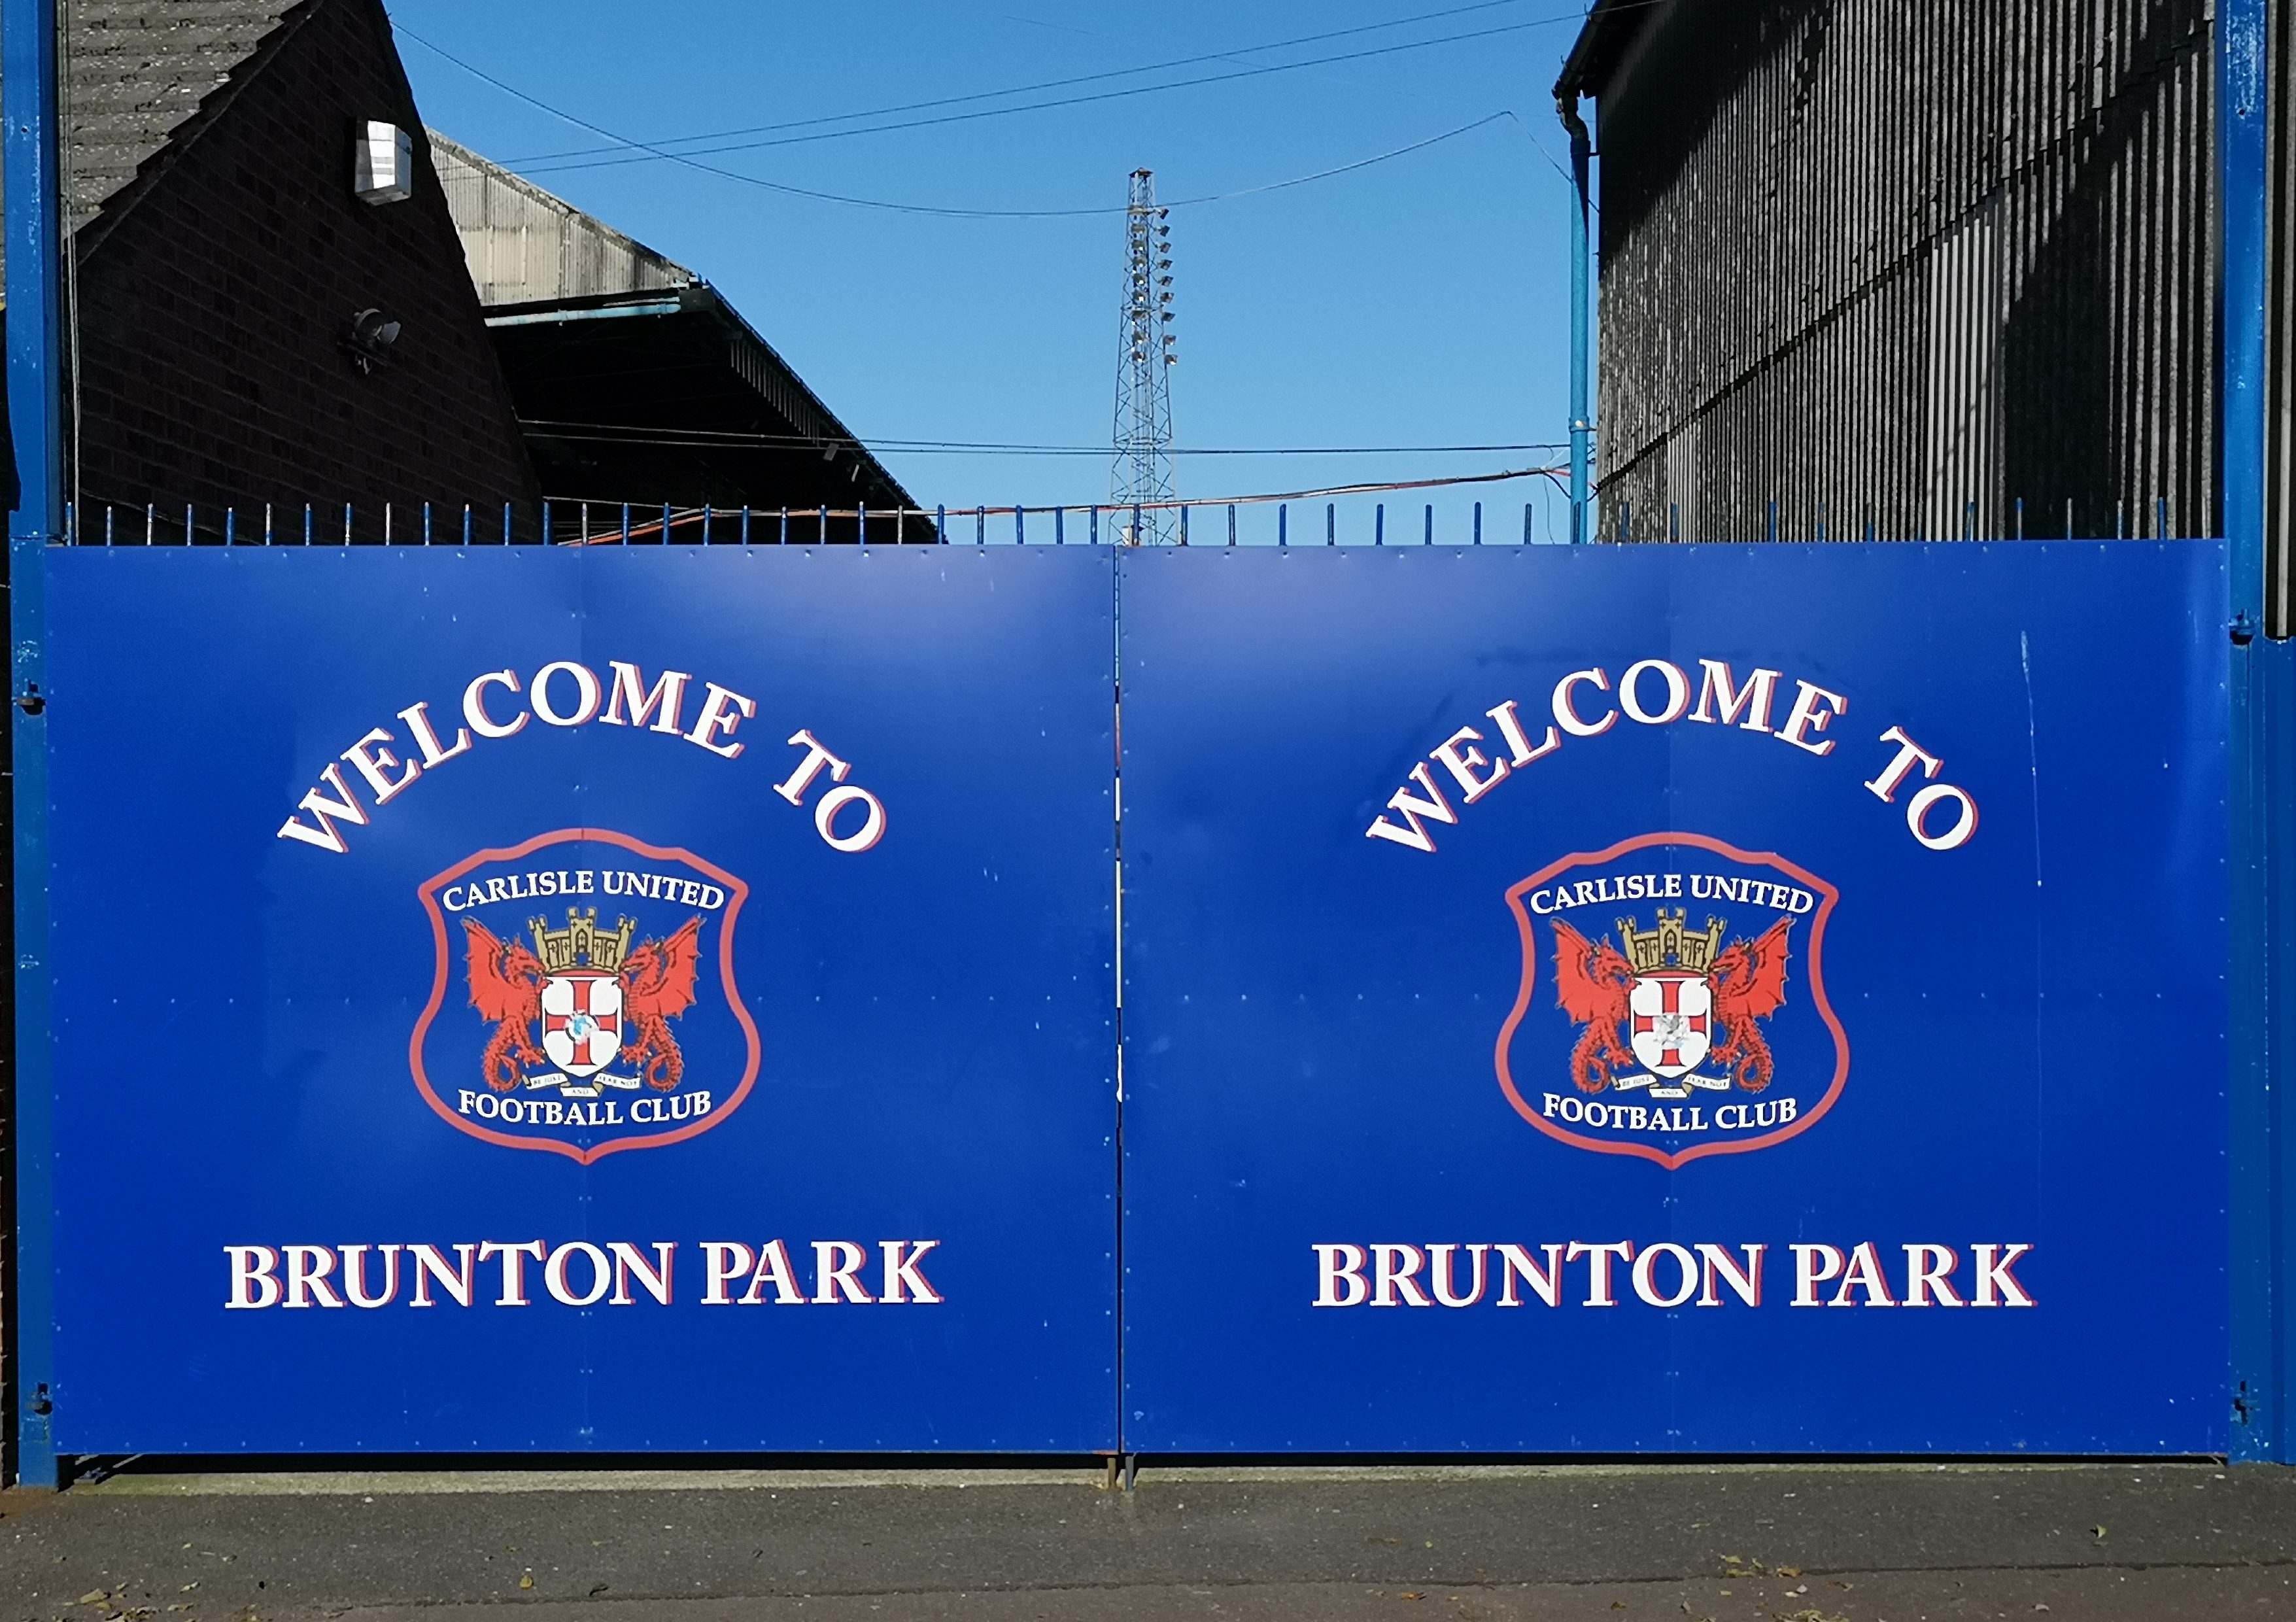 Welcome to Brunton Park, home to Carlisle United Football Club.